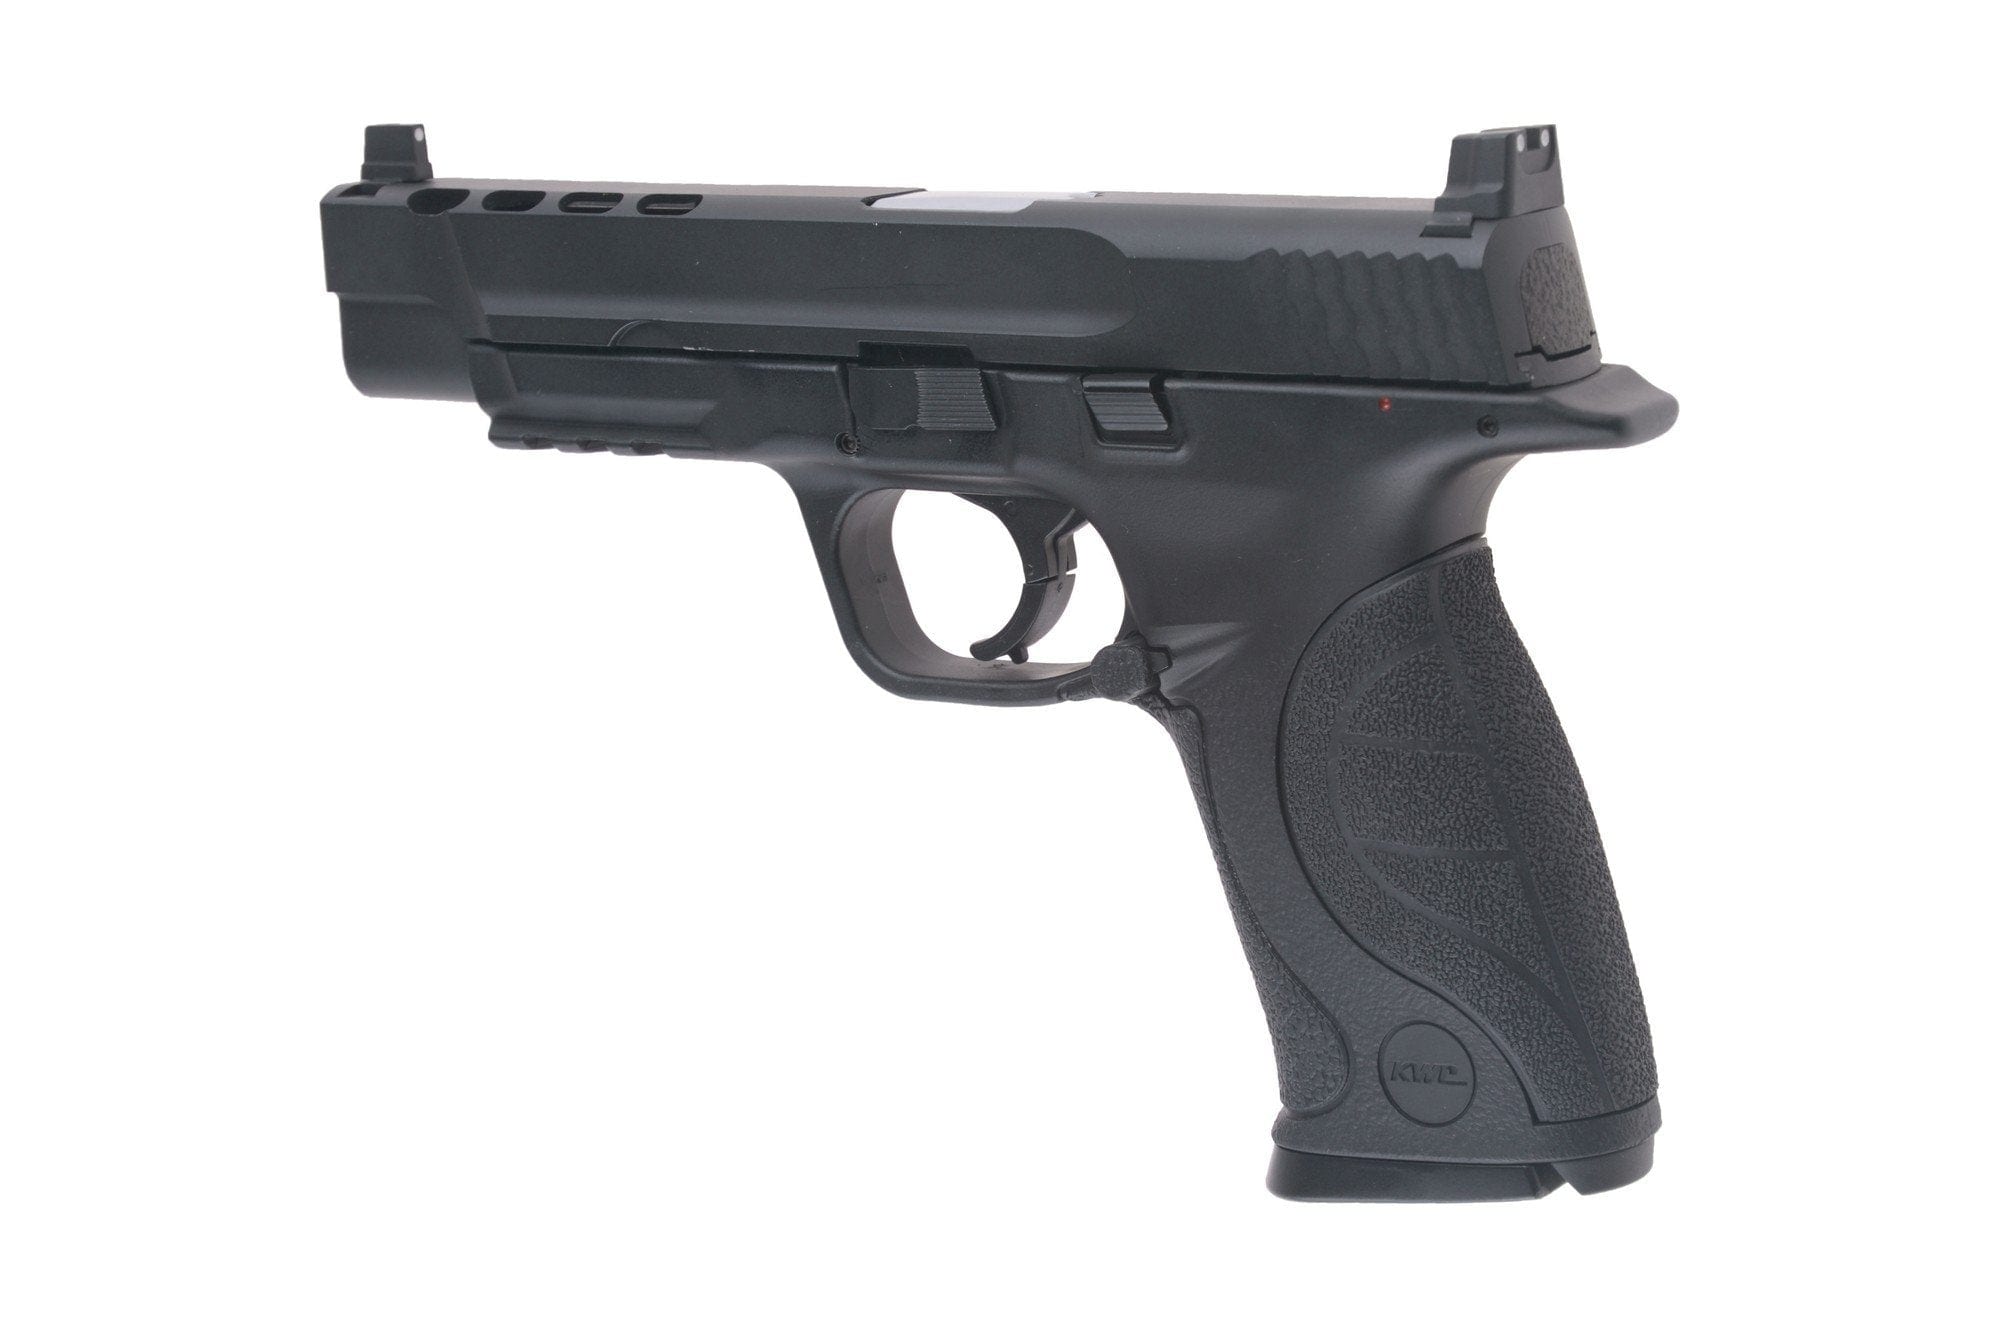 KWC 483 pistol replica (CO2) by KWC on Airsoft Mania Europe